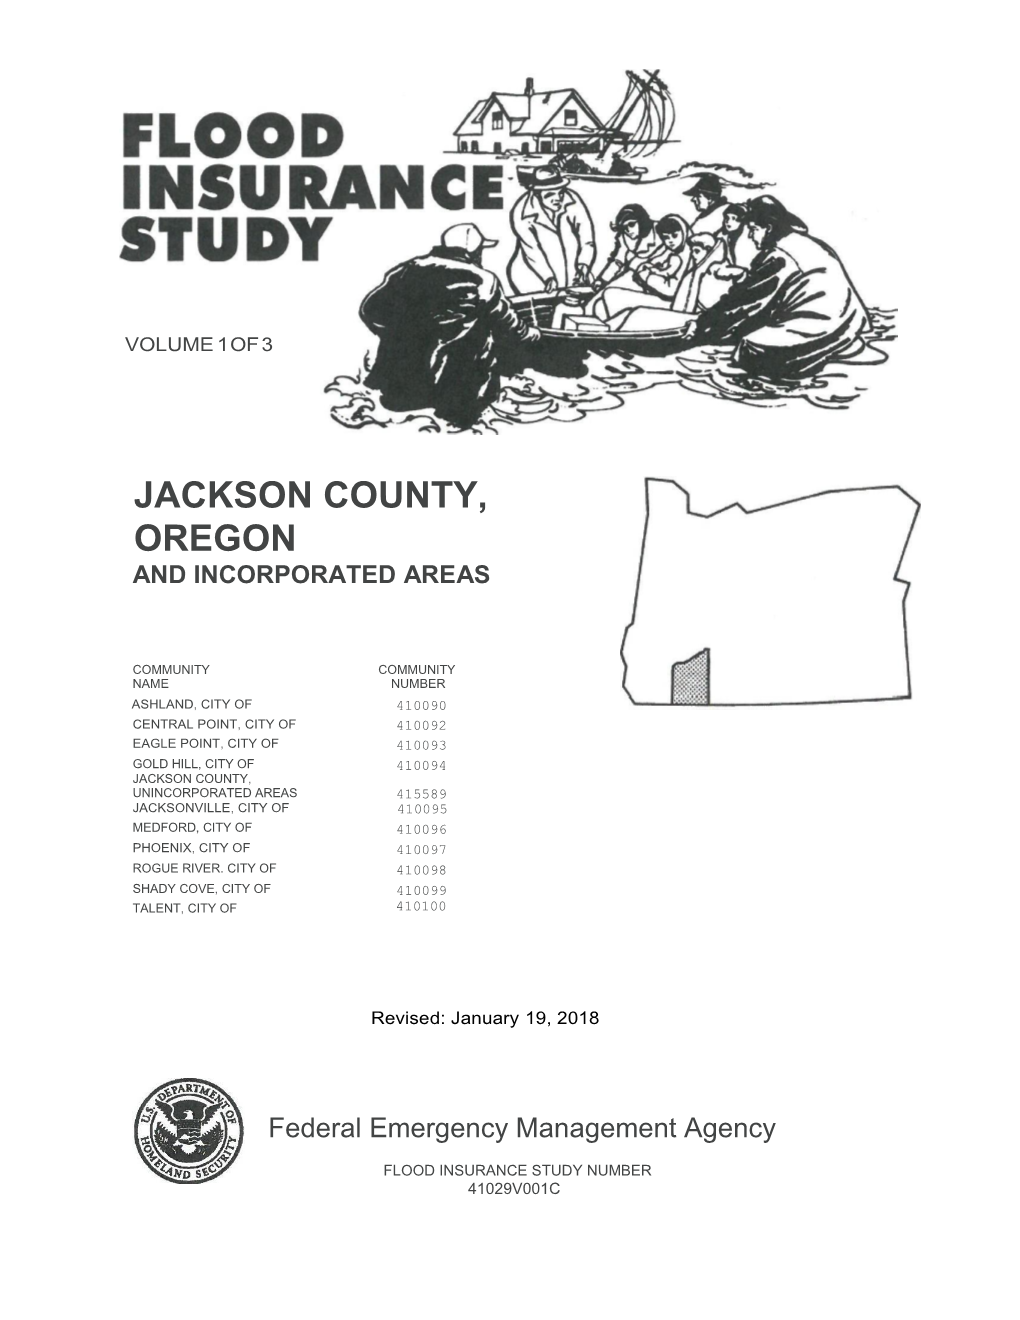 Jackson County, Oregon and Incorporated Areas